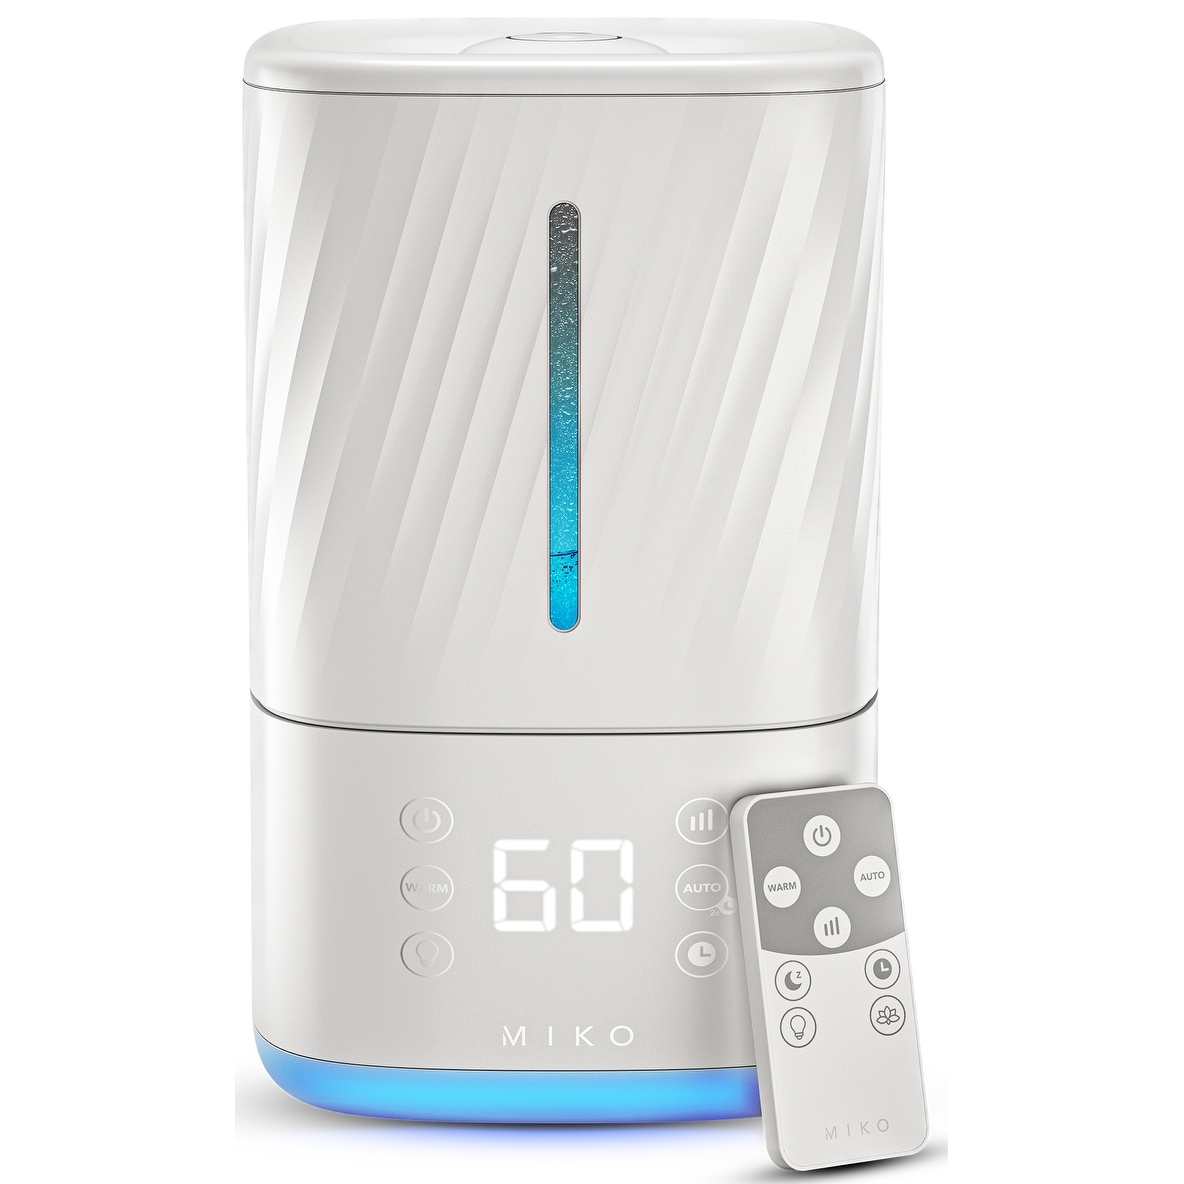 Humidifiers - Bed Bath & Beyond